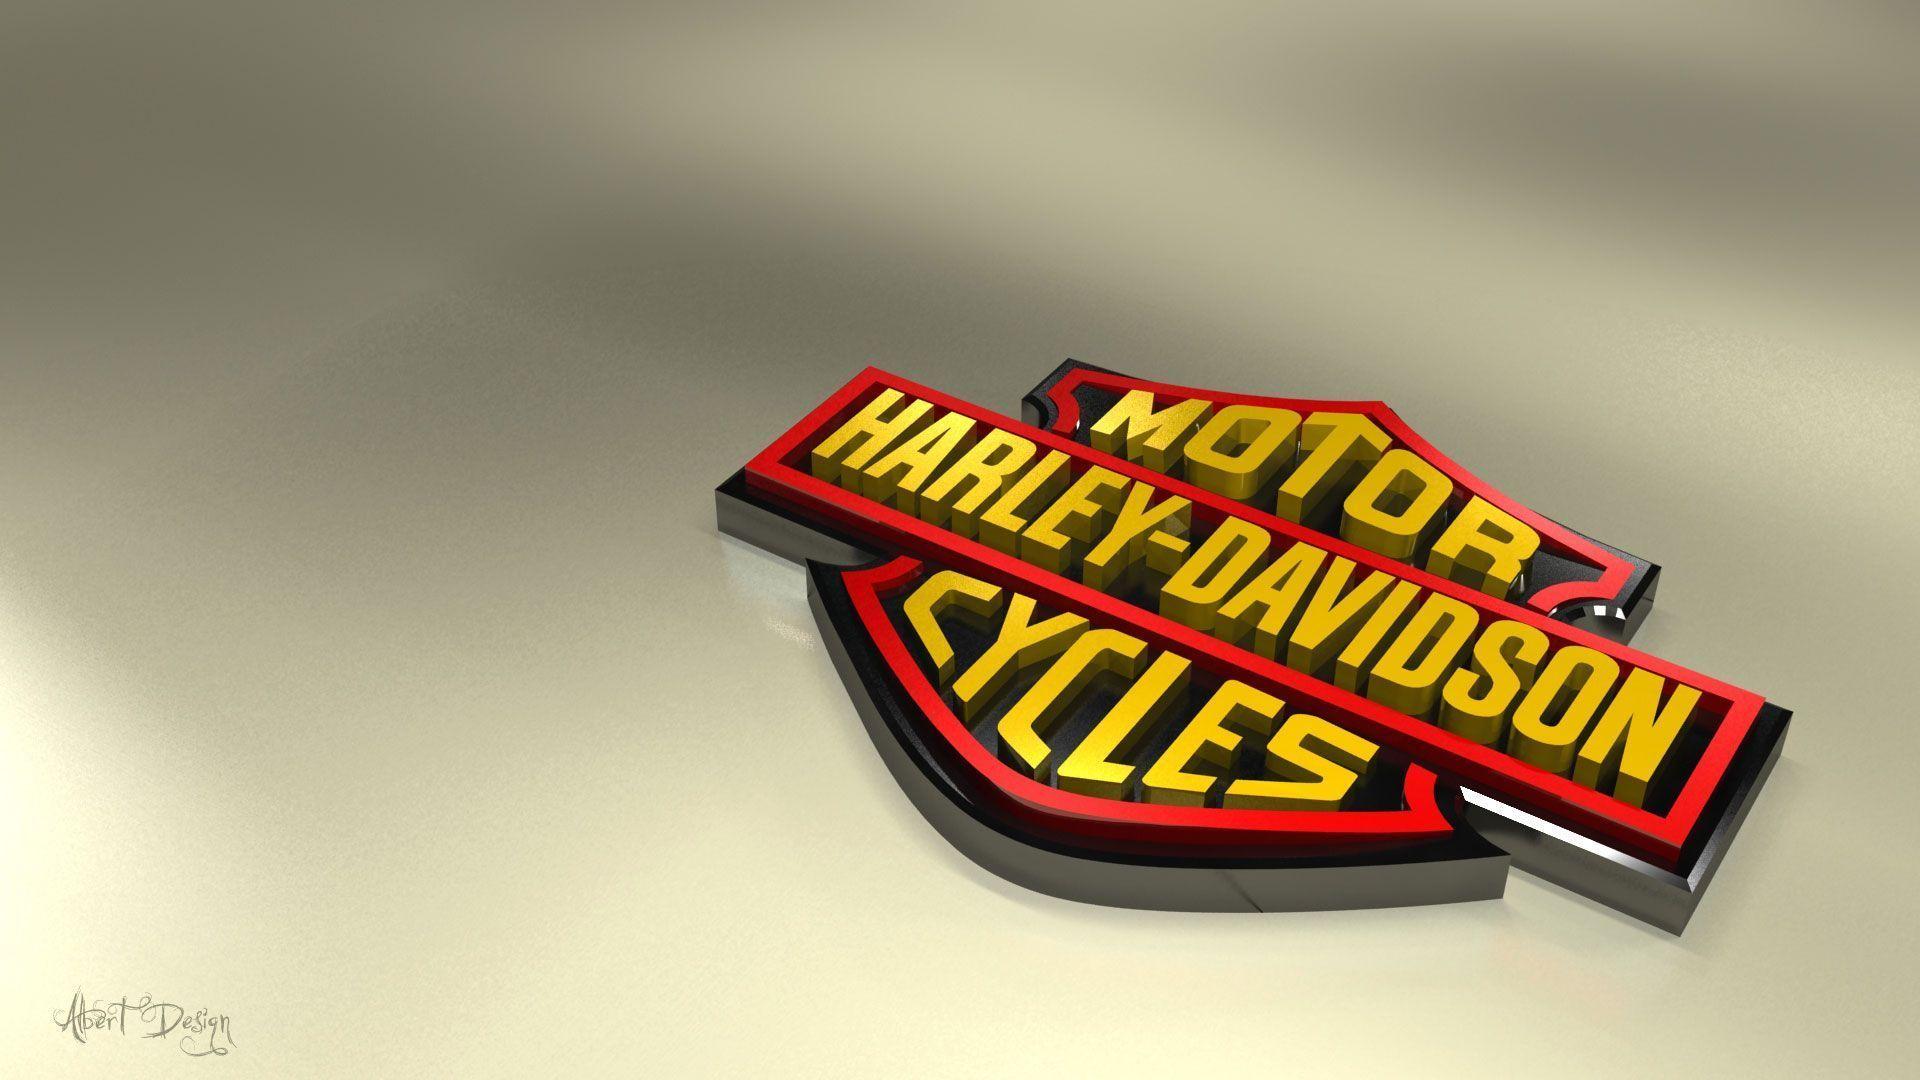 Wallpapers For > Harley Davidson Logo Wallpapers Hd